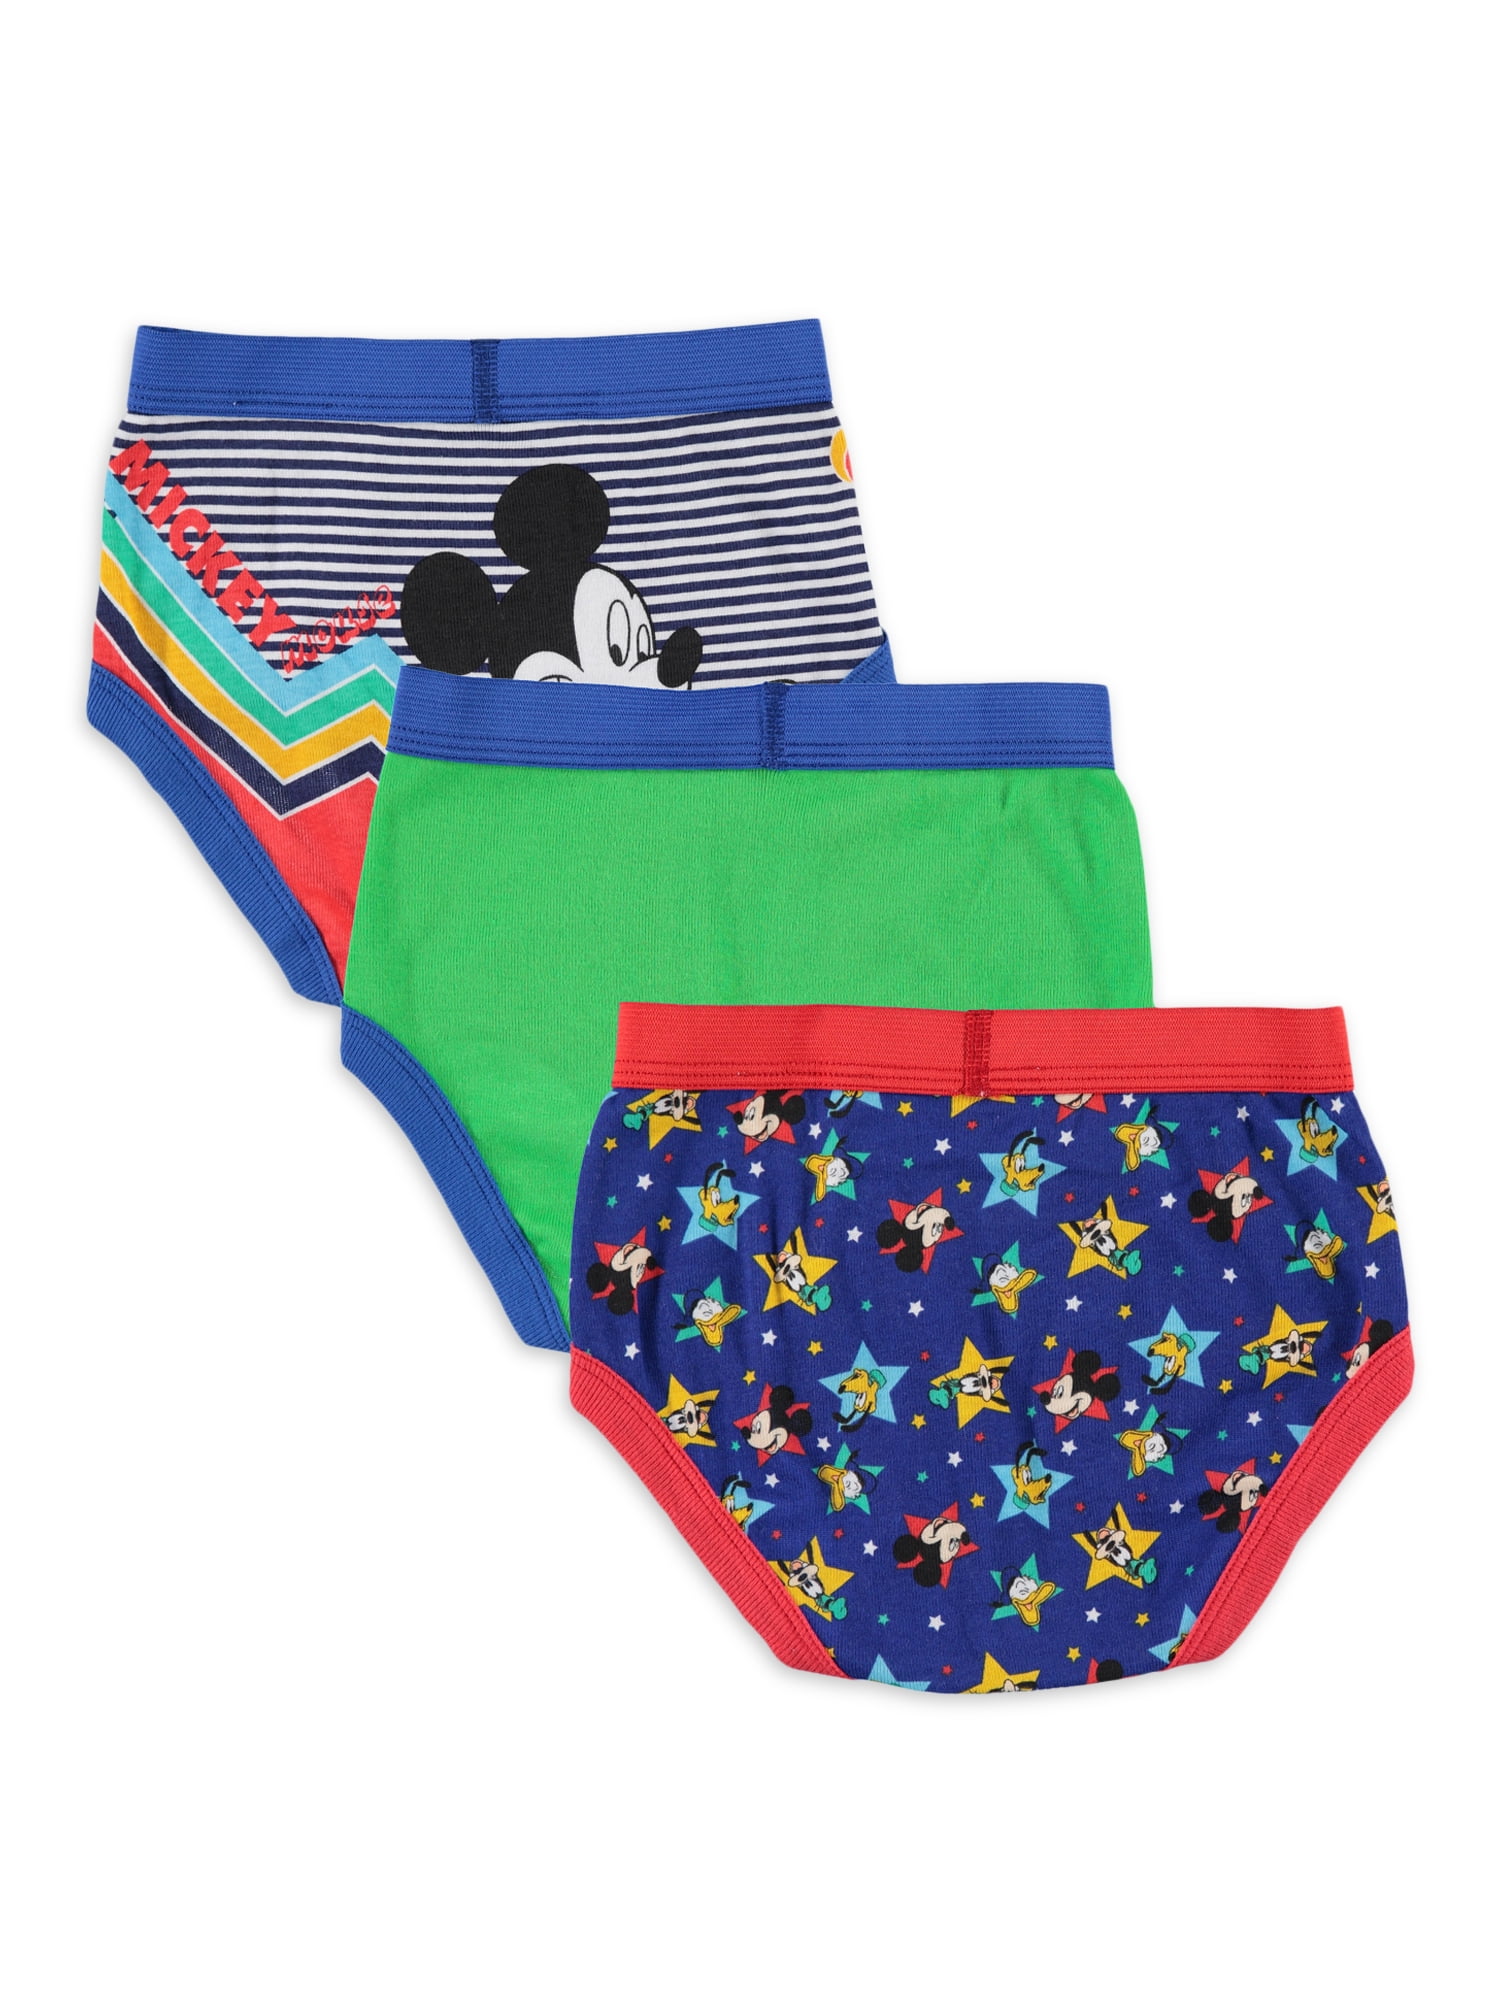 Mickey Mouse Toddler Boy Training Underwear, 12-Pack, Sizes 2T-4T